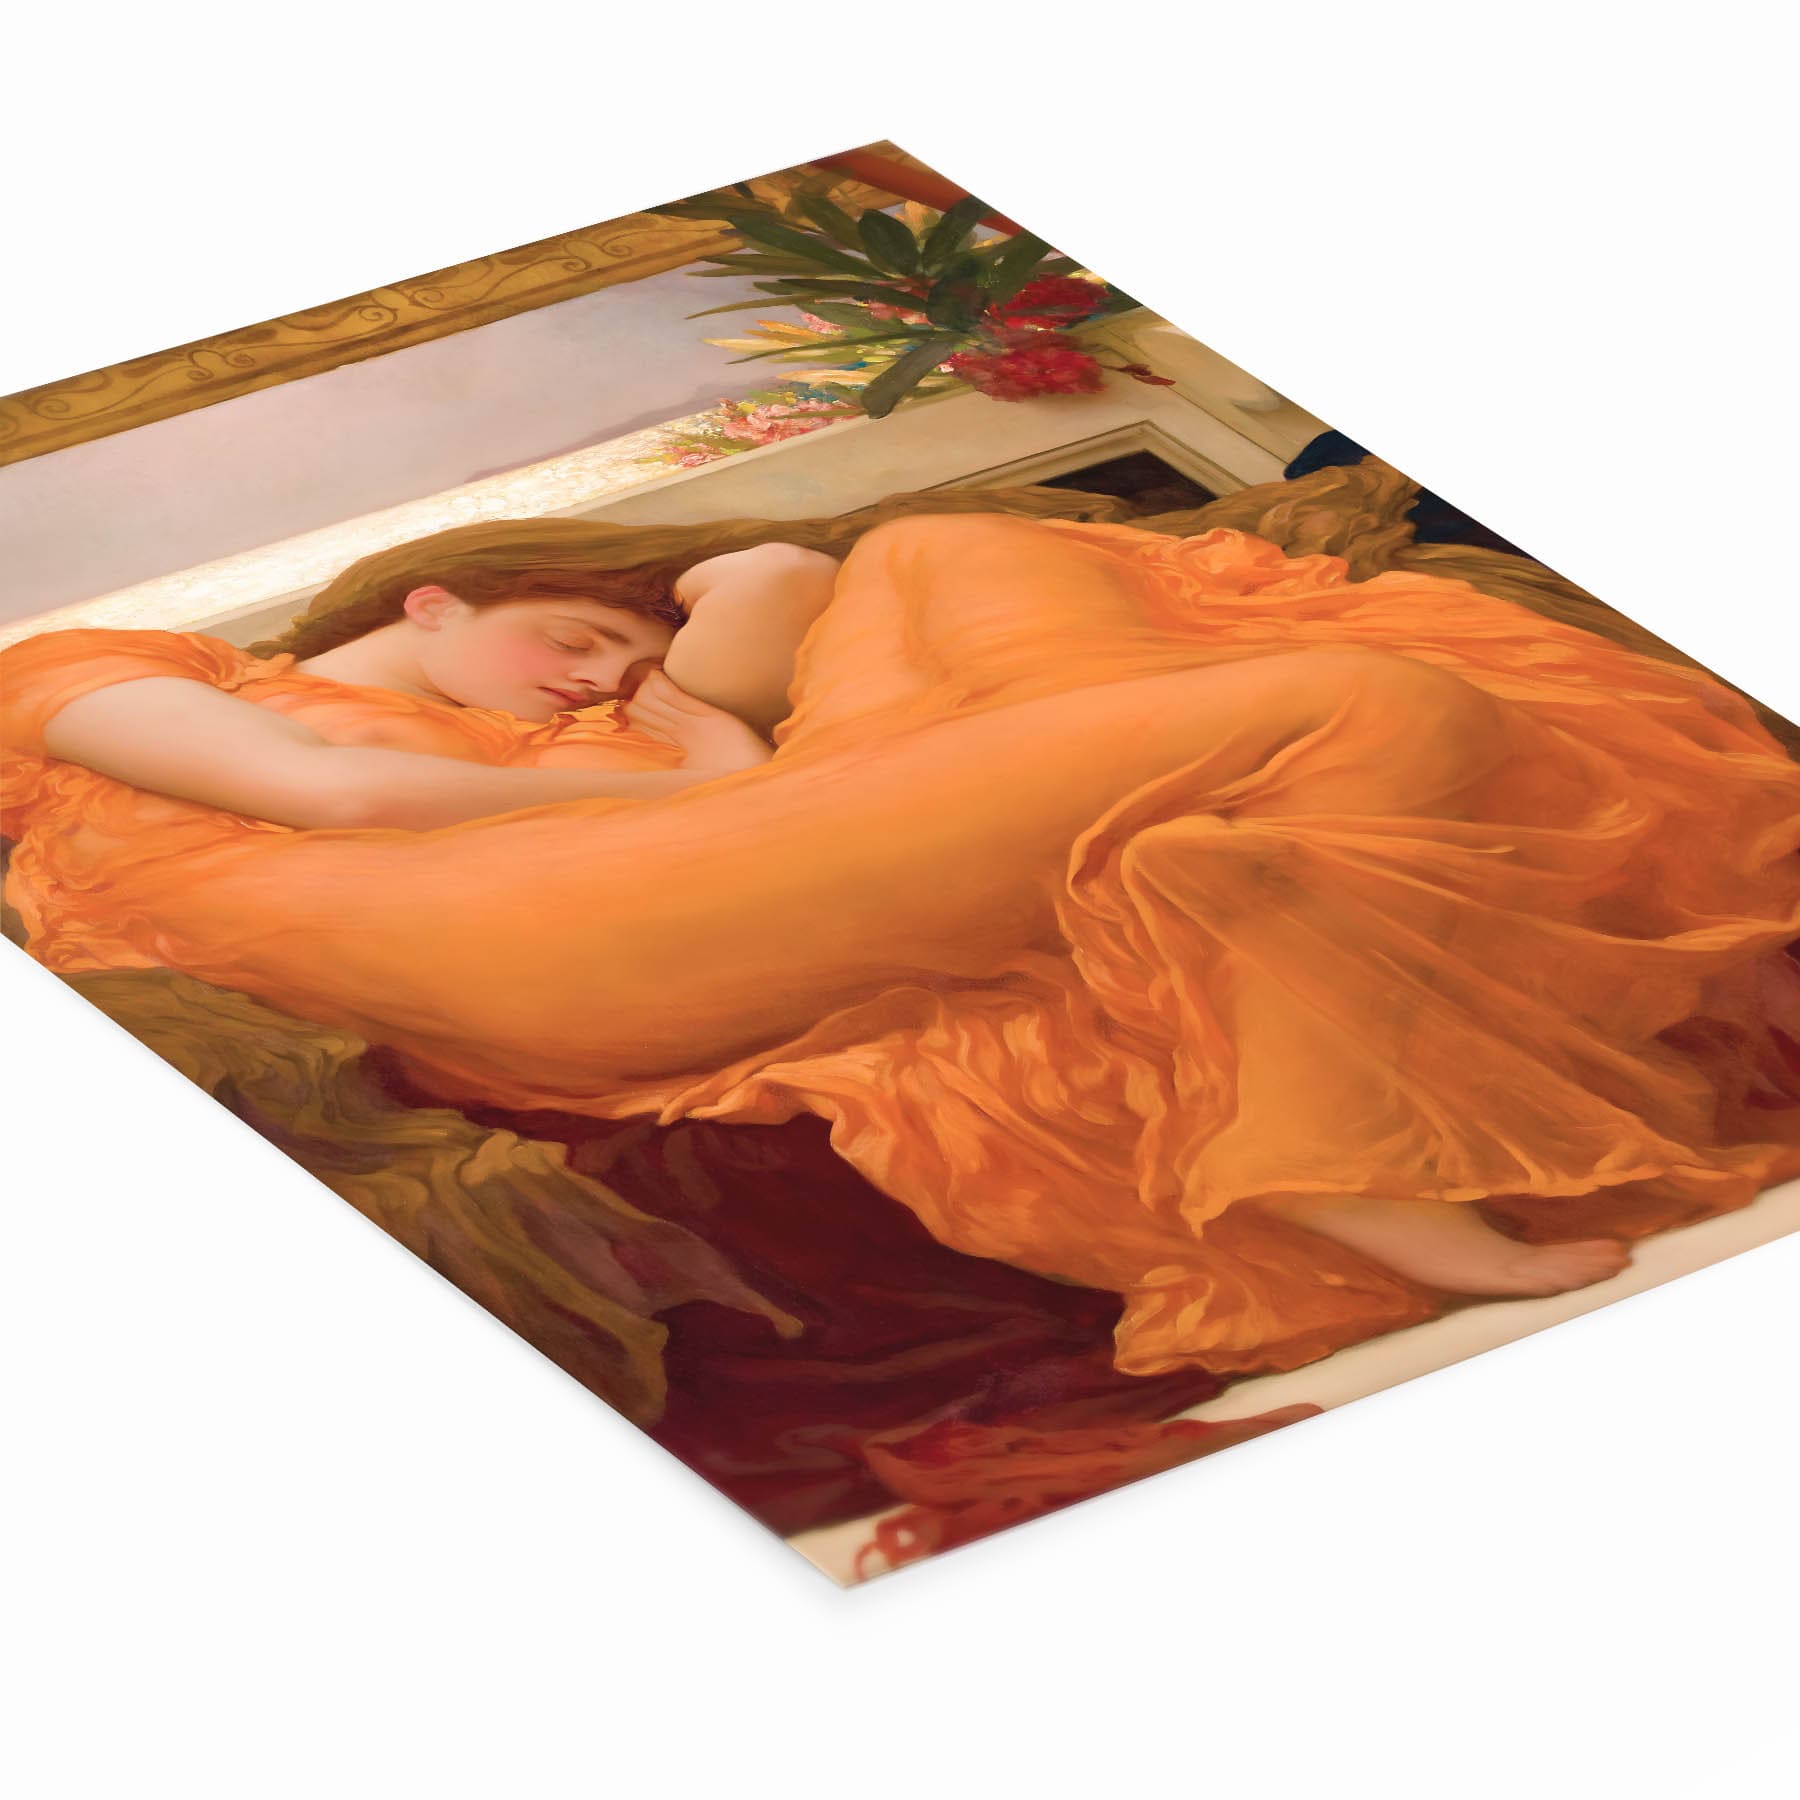 Woman Sleeping in a Bright Orange Dress Painting Laying Flat on a White Background